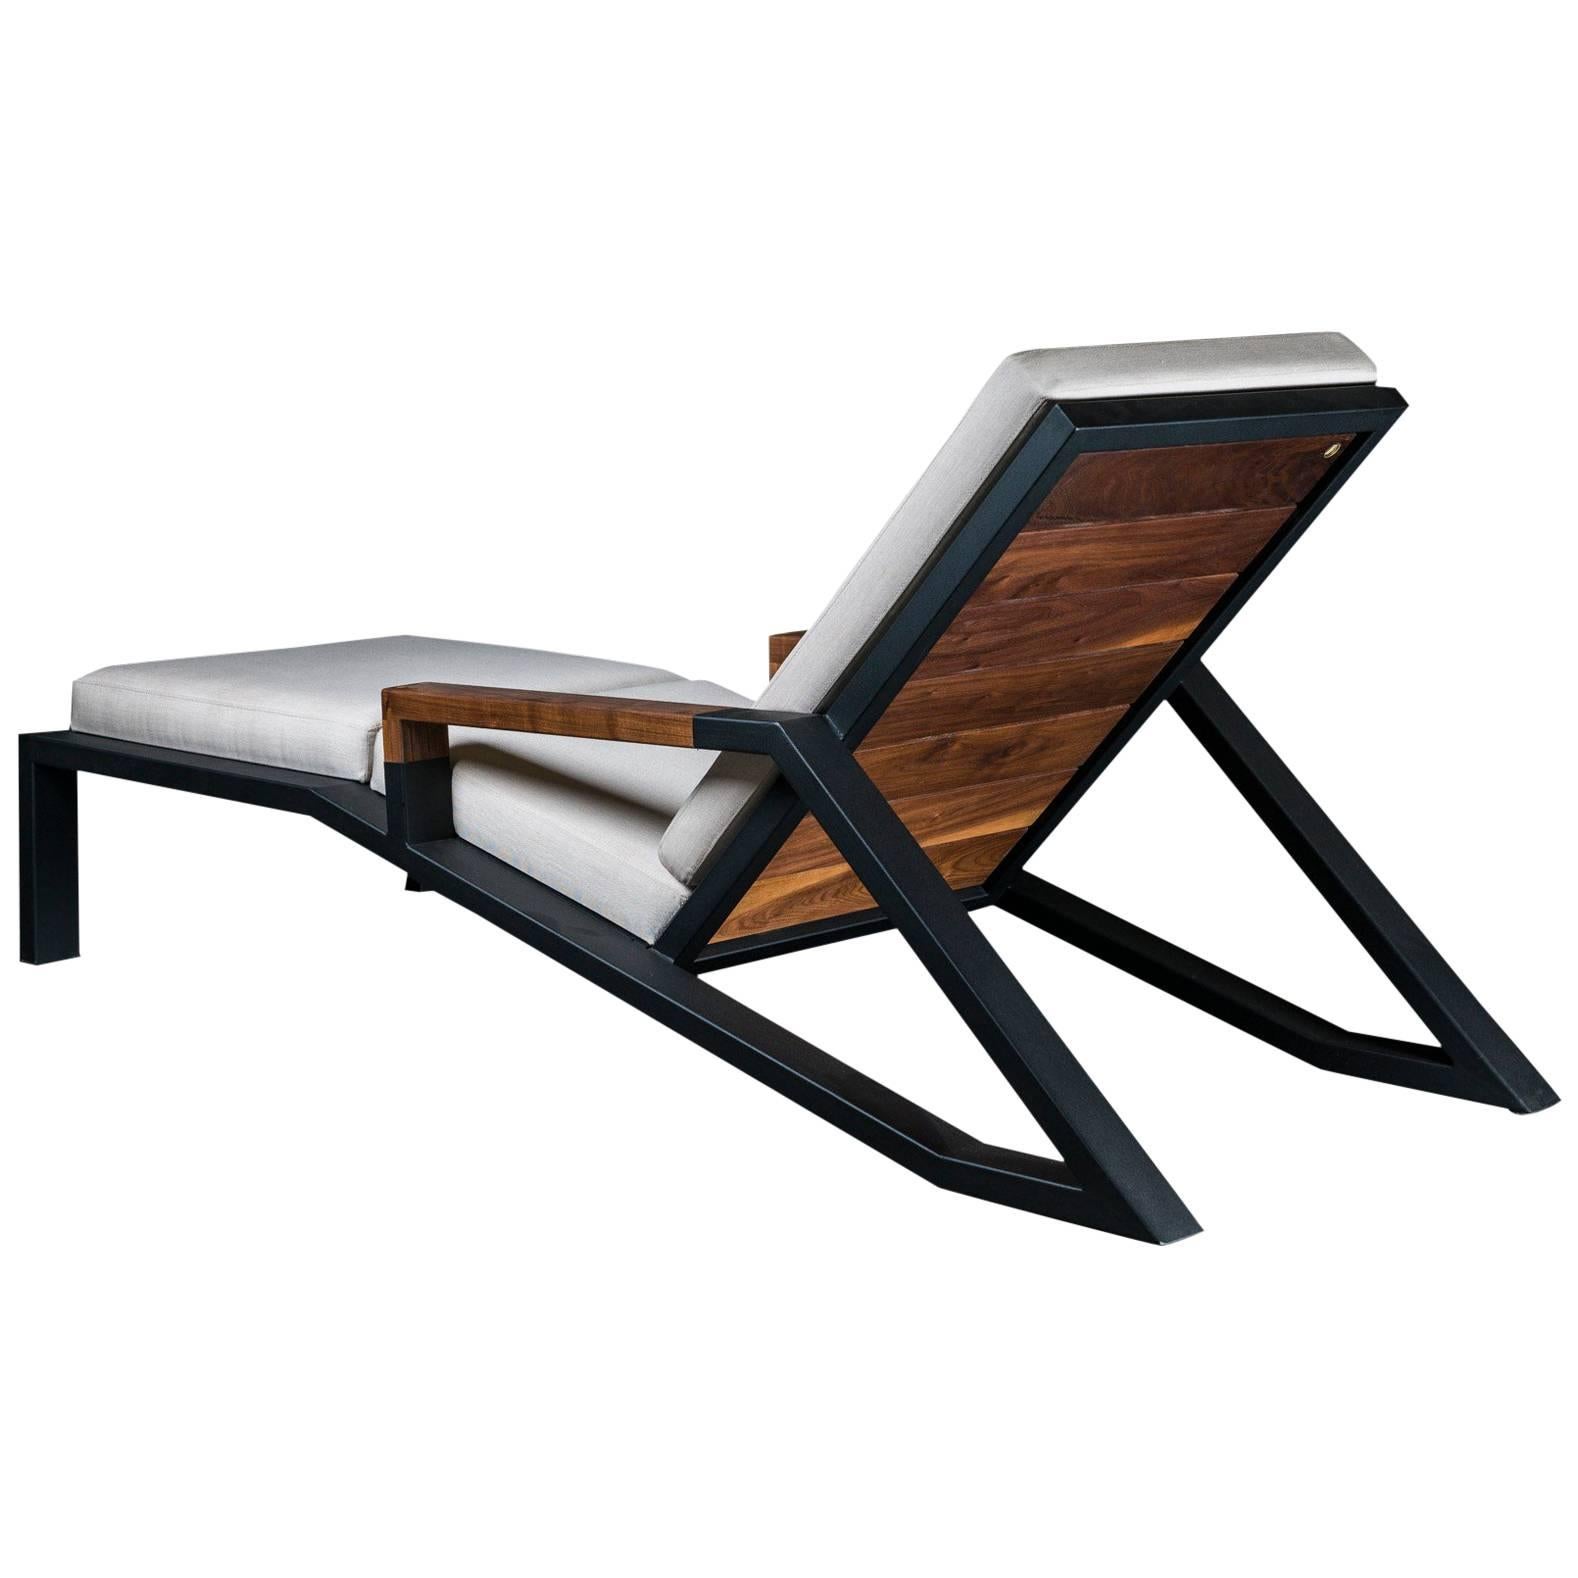 Baltimore Lounge Chair by Ambrozia, Walnut, Black Steel and Beige Upholstery